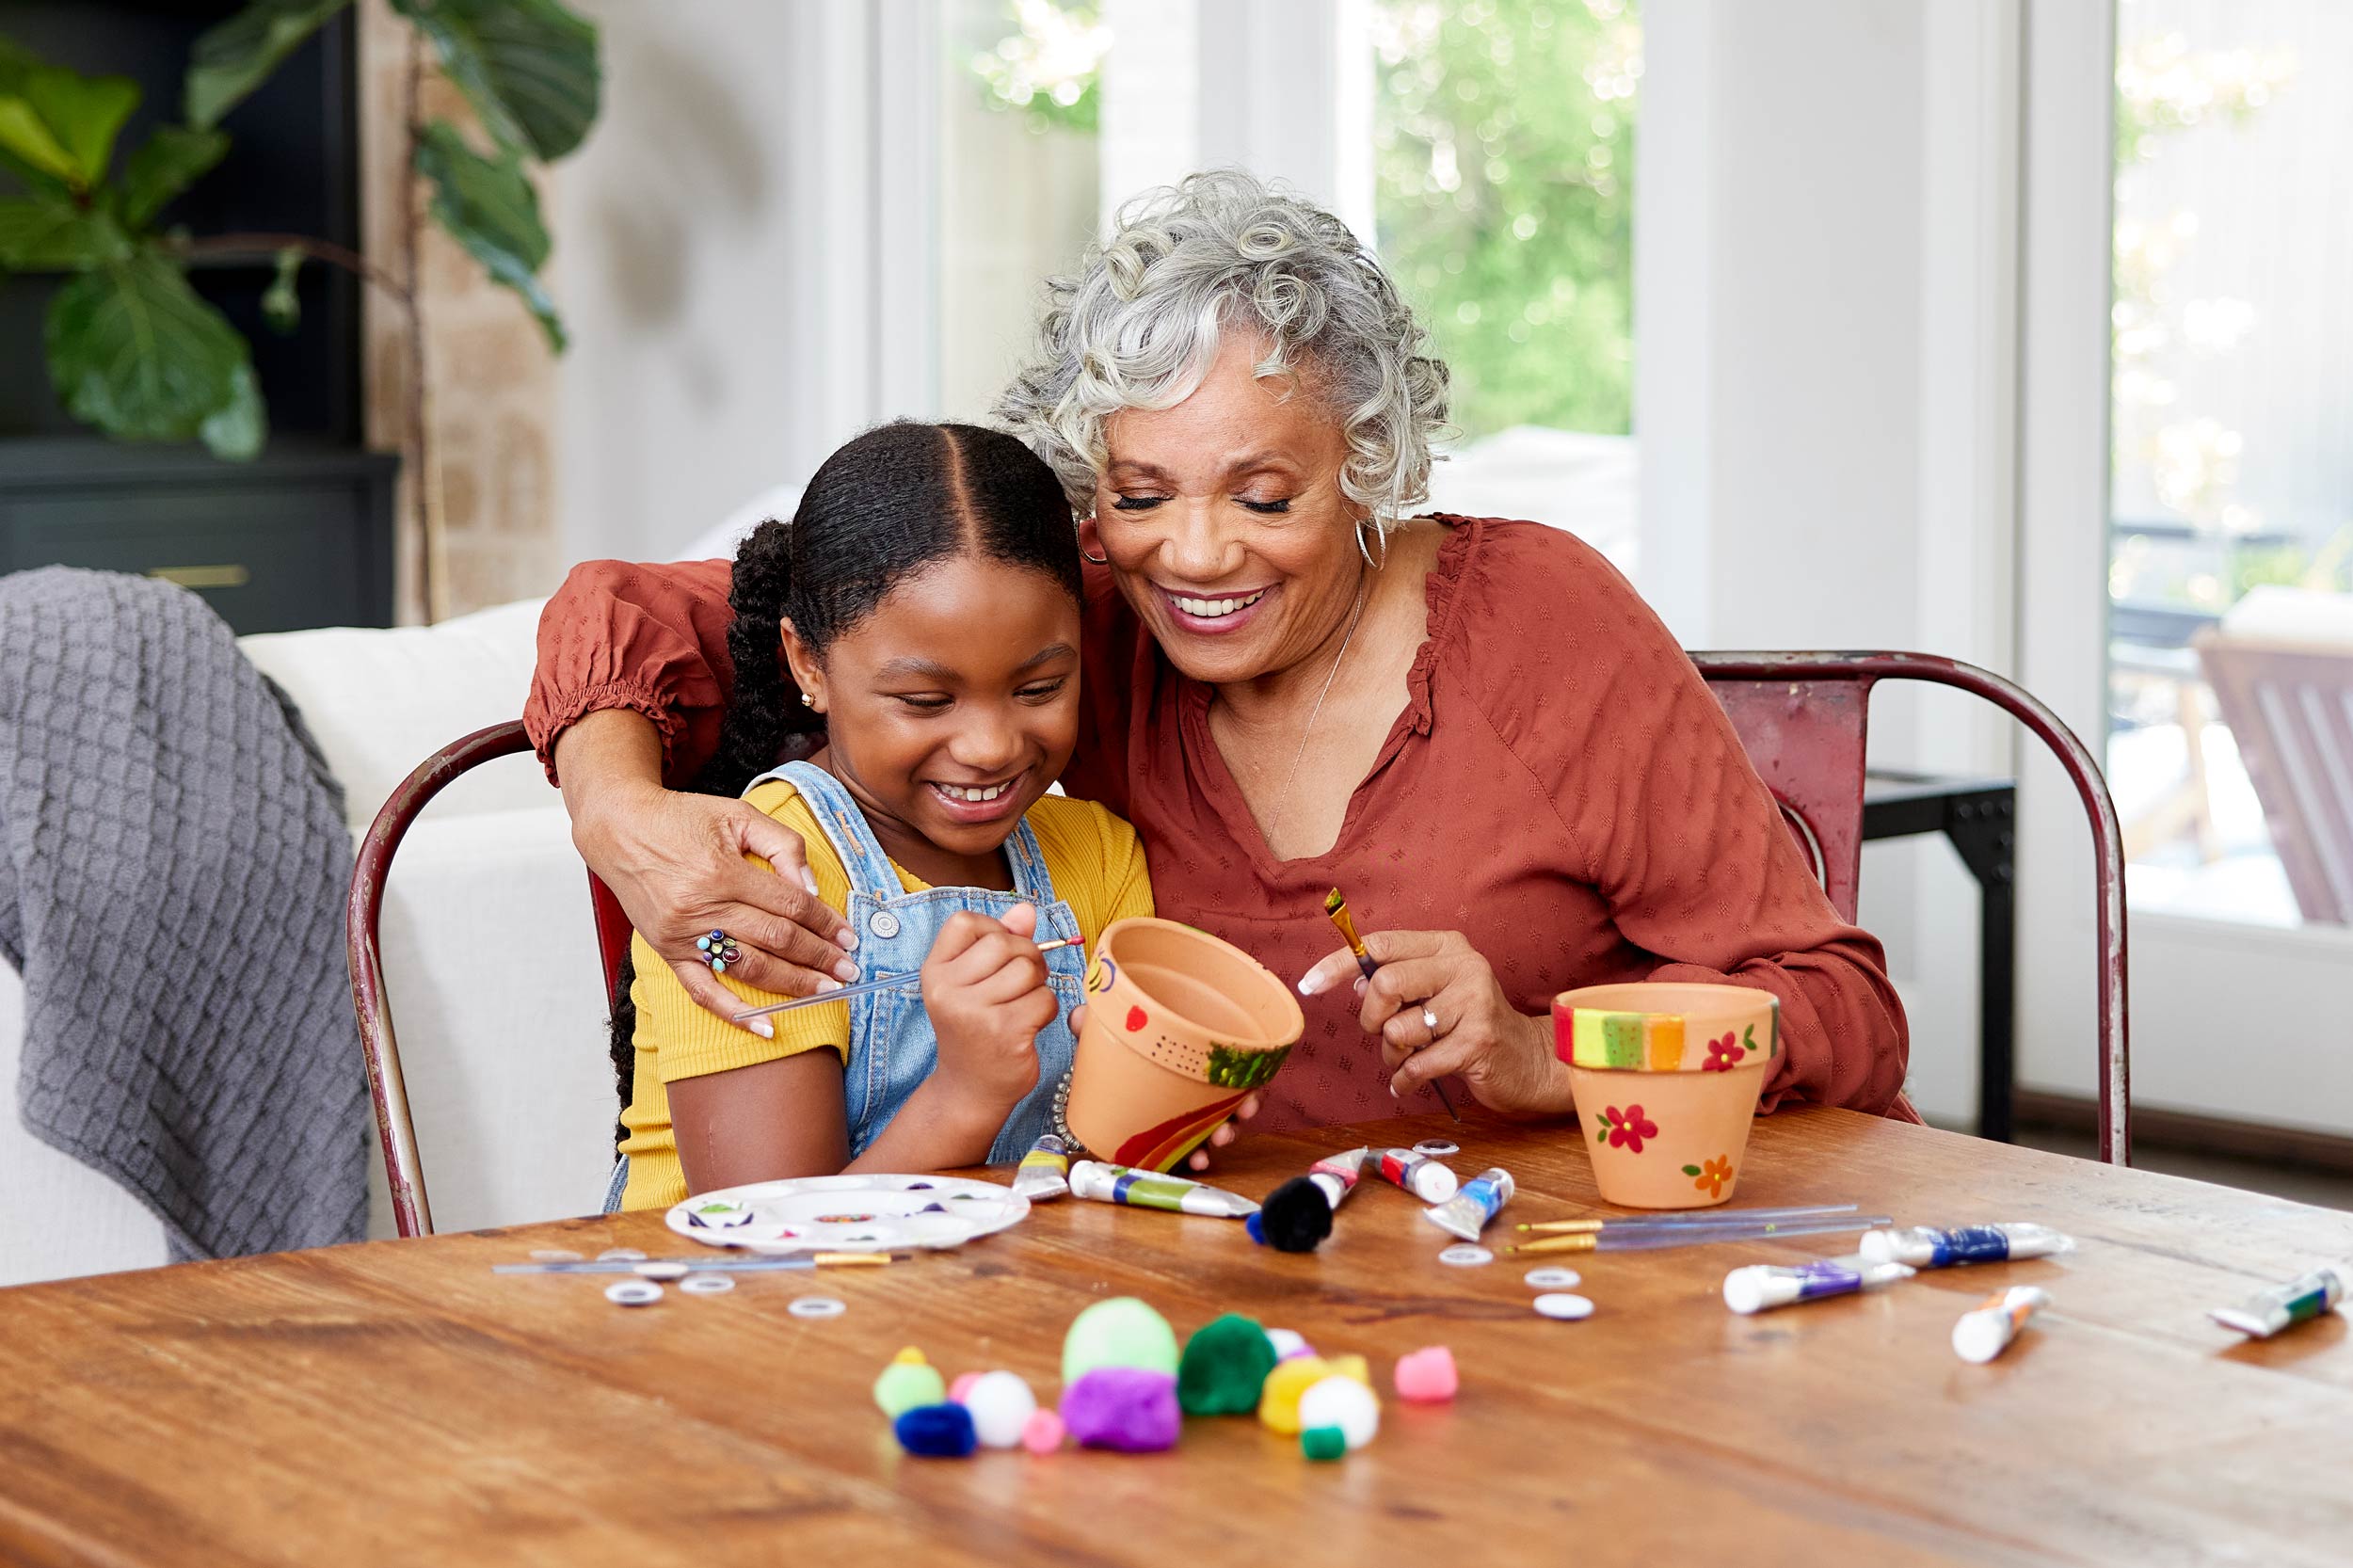 Indoor lifestyle photograph of grandmother and granddaughter crafting art together at dining room table.